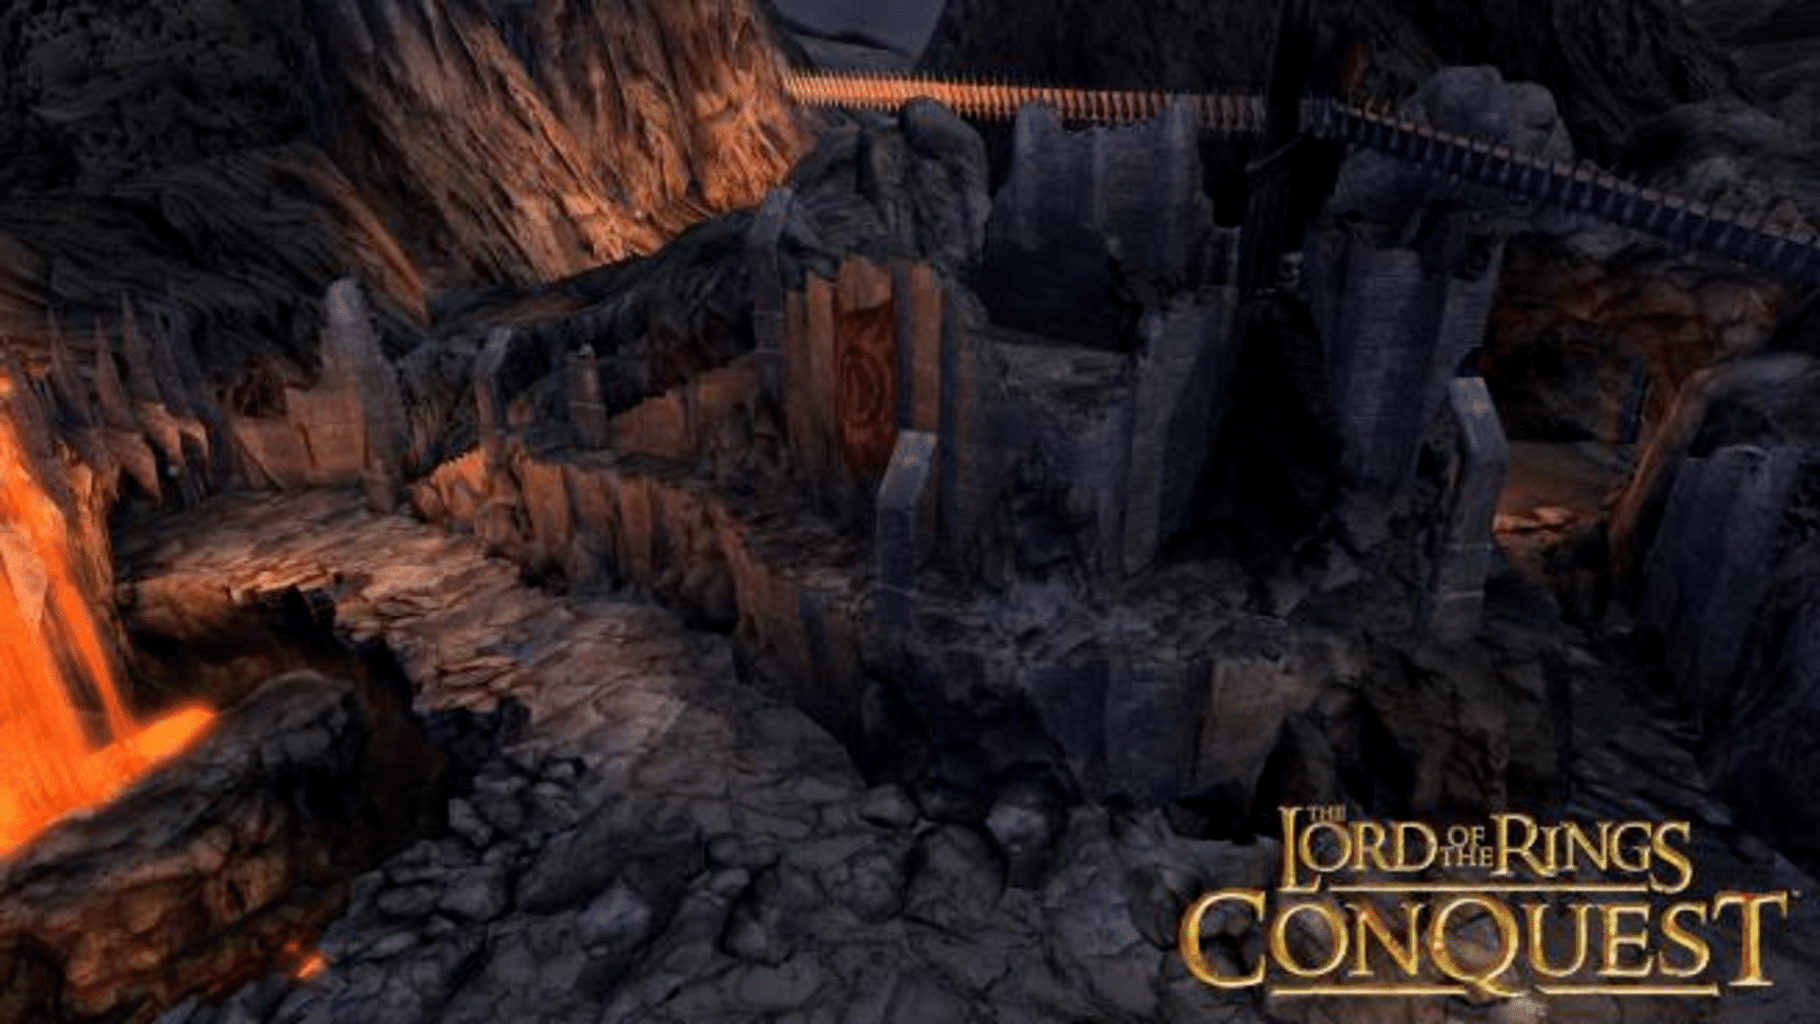 The Lord of the Rings: Conquest screenshot